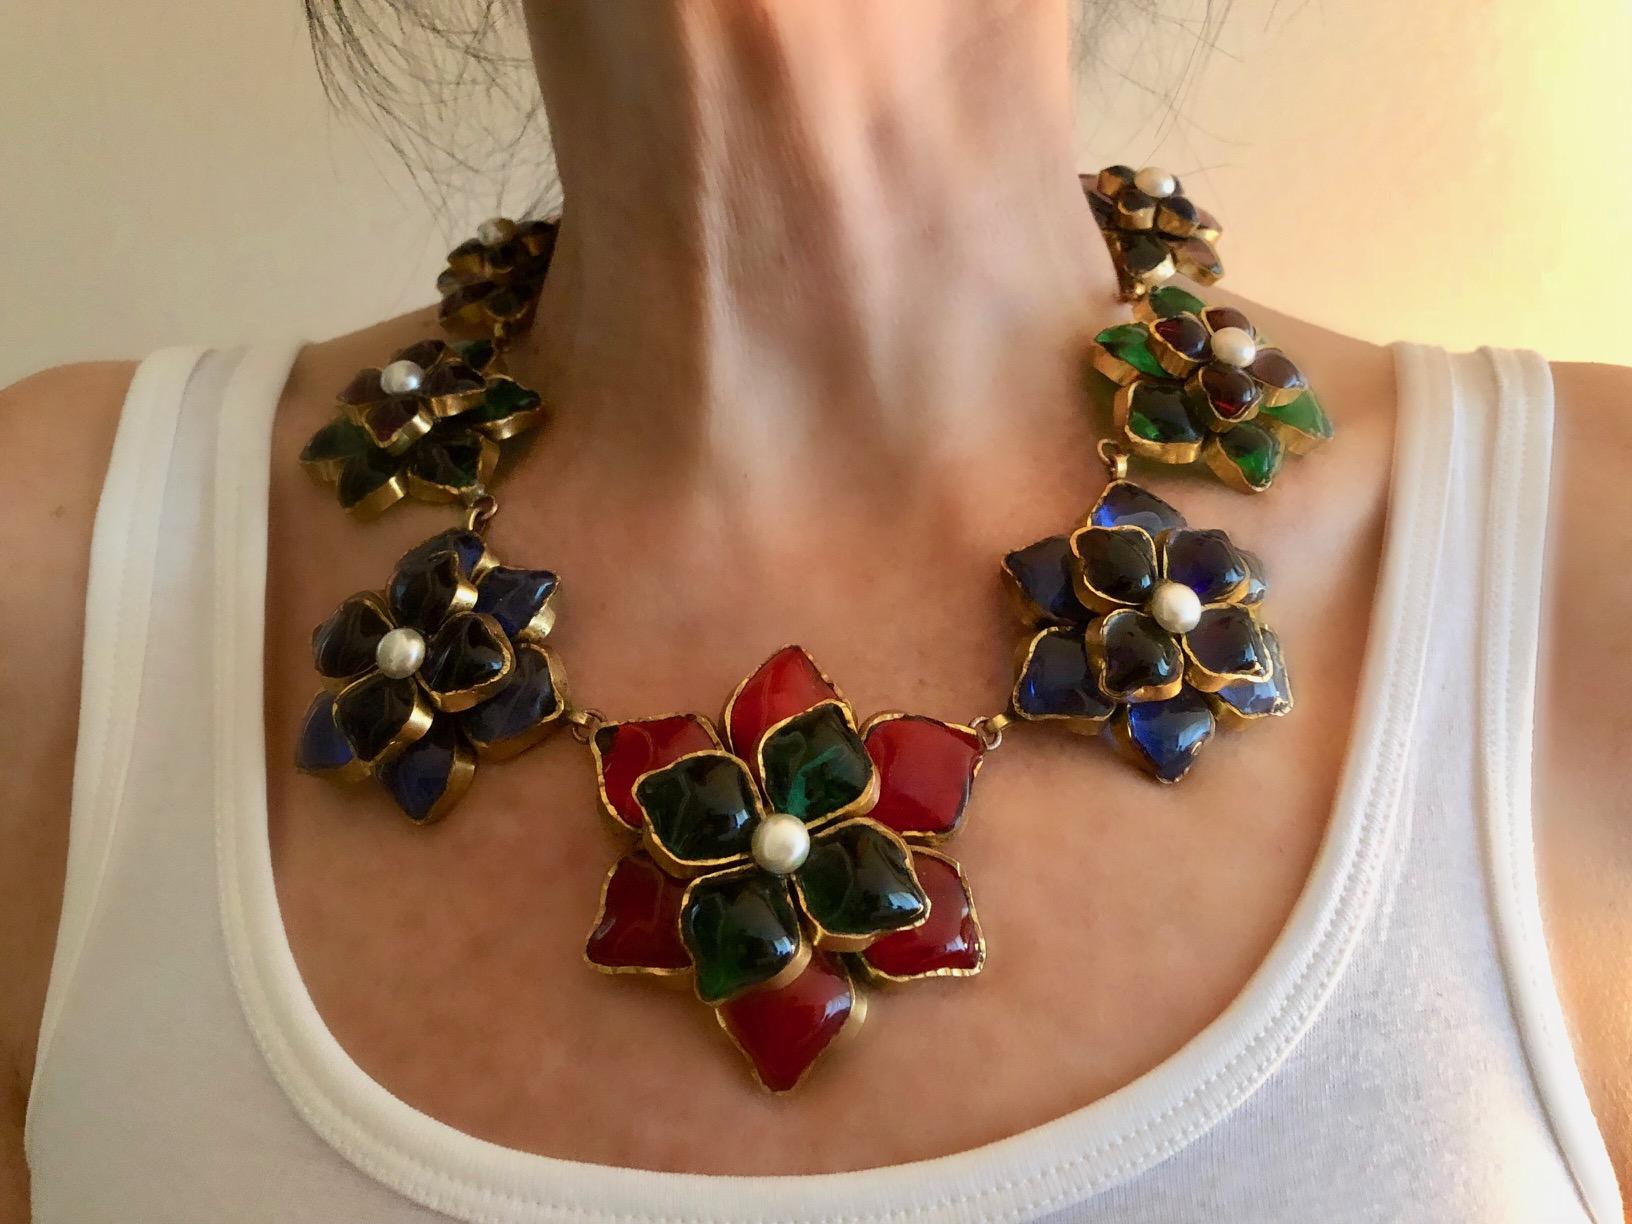 This important and scarce Chanel statement necklace is comprised of handcrafted gilt metal and pate de verre (poured glass) by Maison Gripoix in Paris circa early 1980's. Incredibly unusual in all Chanel manner it features six large colored flowers